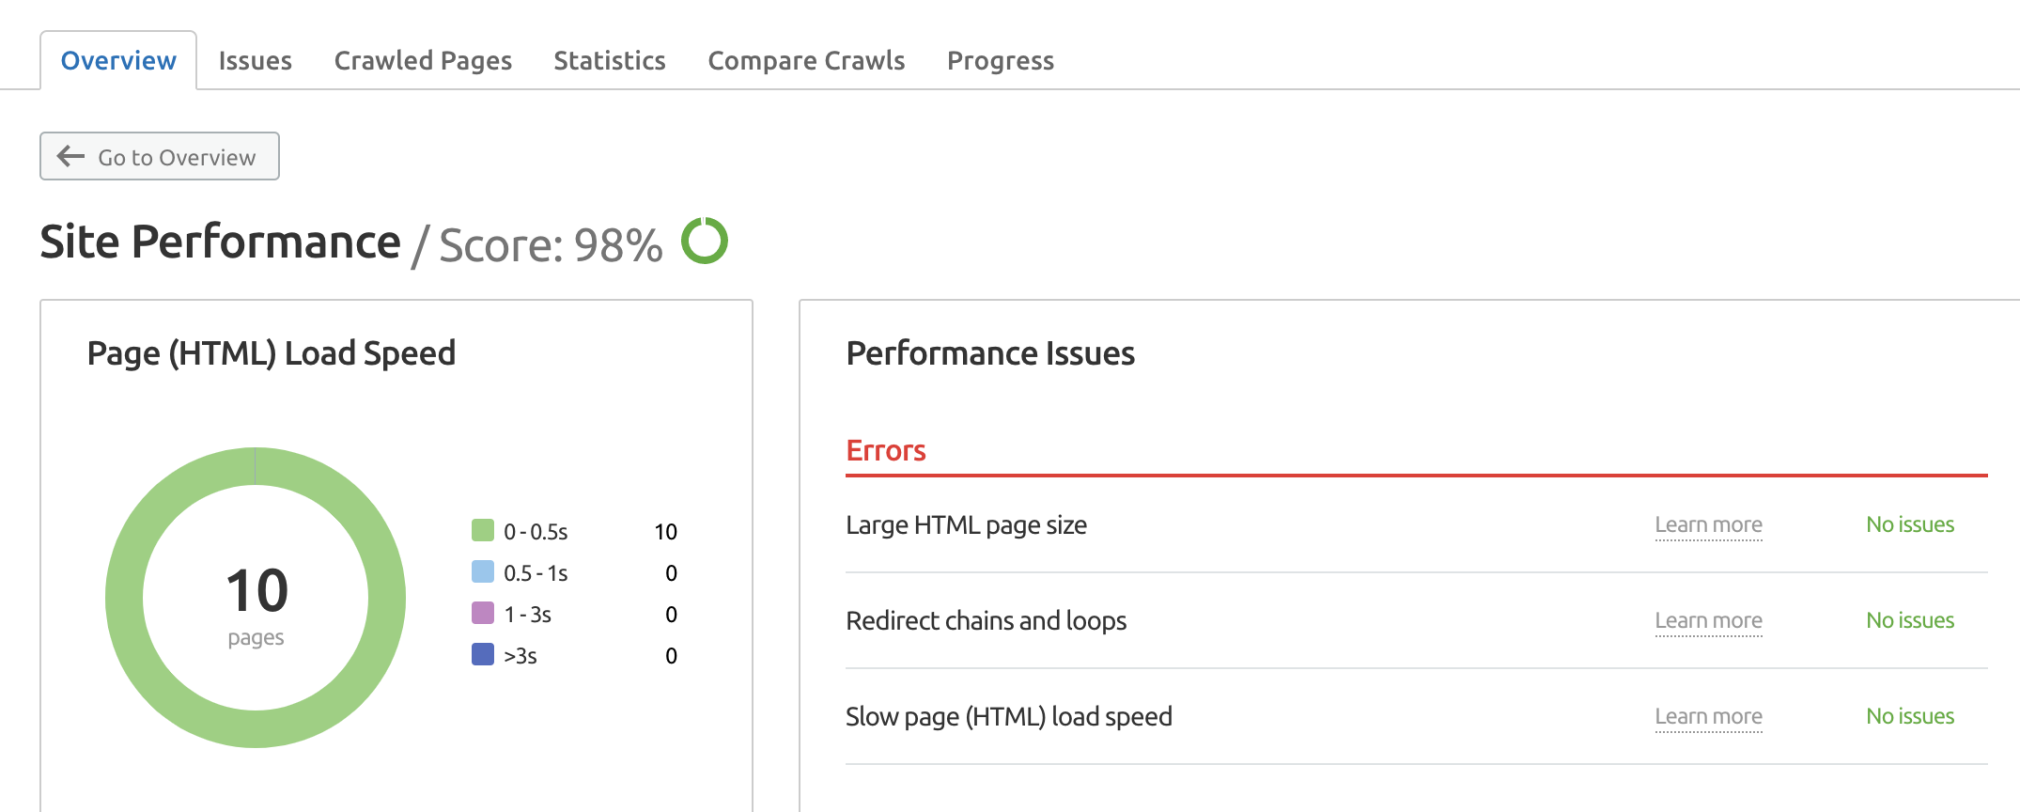 Site Performance overview